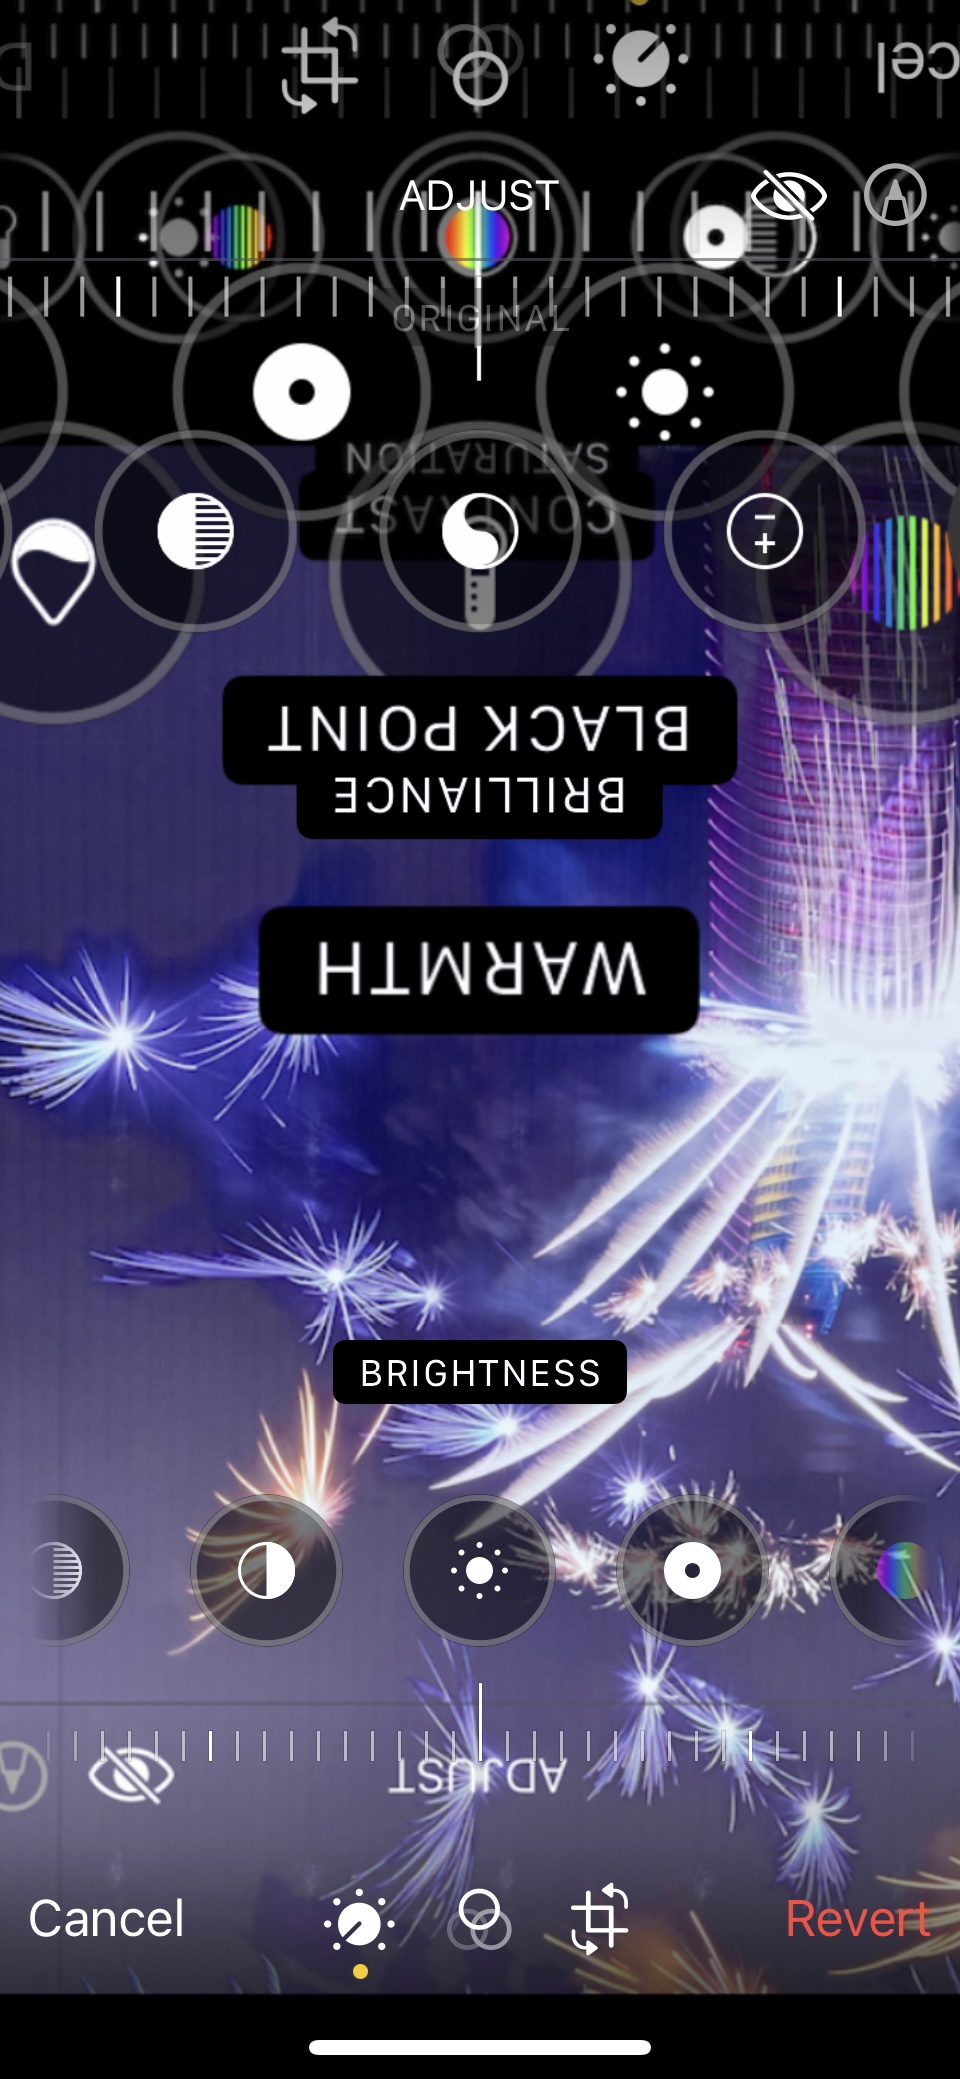 'No filter [Smiling emoji with halo]' panel 3. It's like panel 1, but showing a picture of a purple-blue night sky with fireworks coming from a skyscraper instead. The photo and some of the UI elements are clearly upside-down.